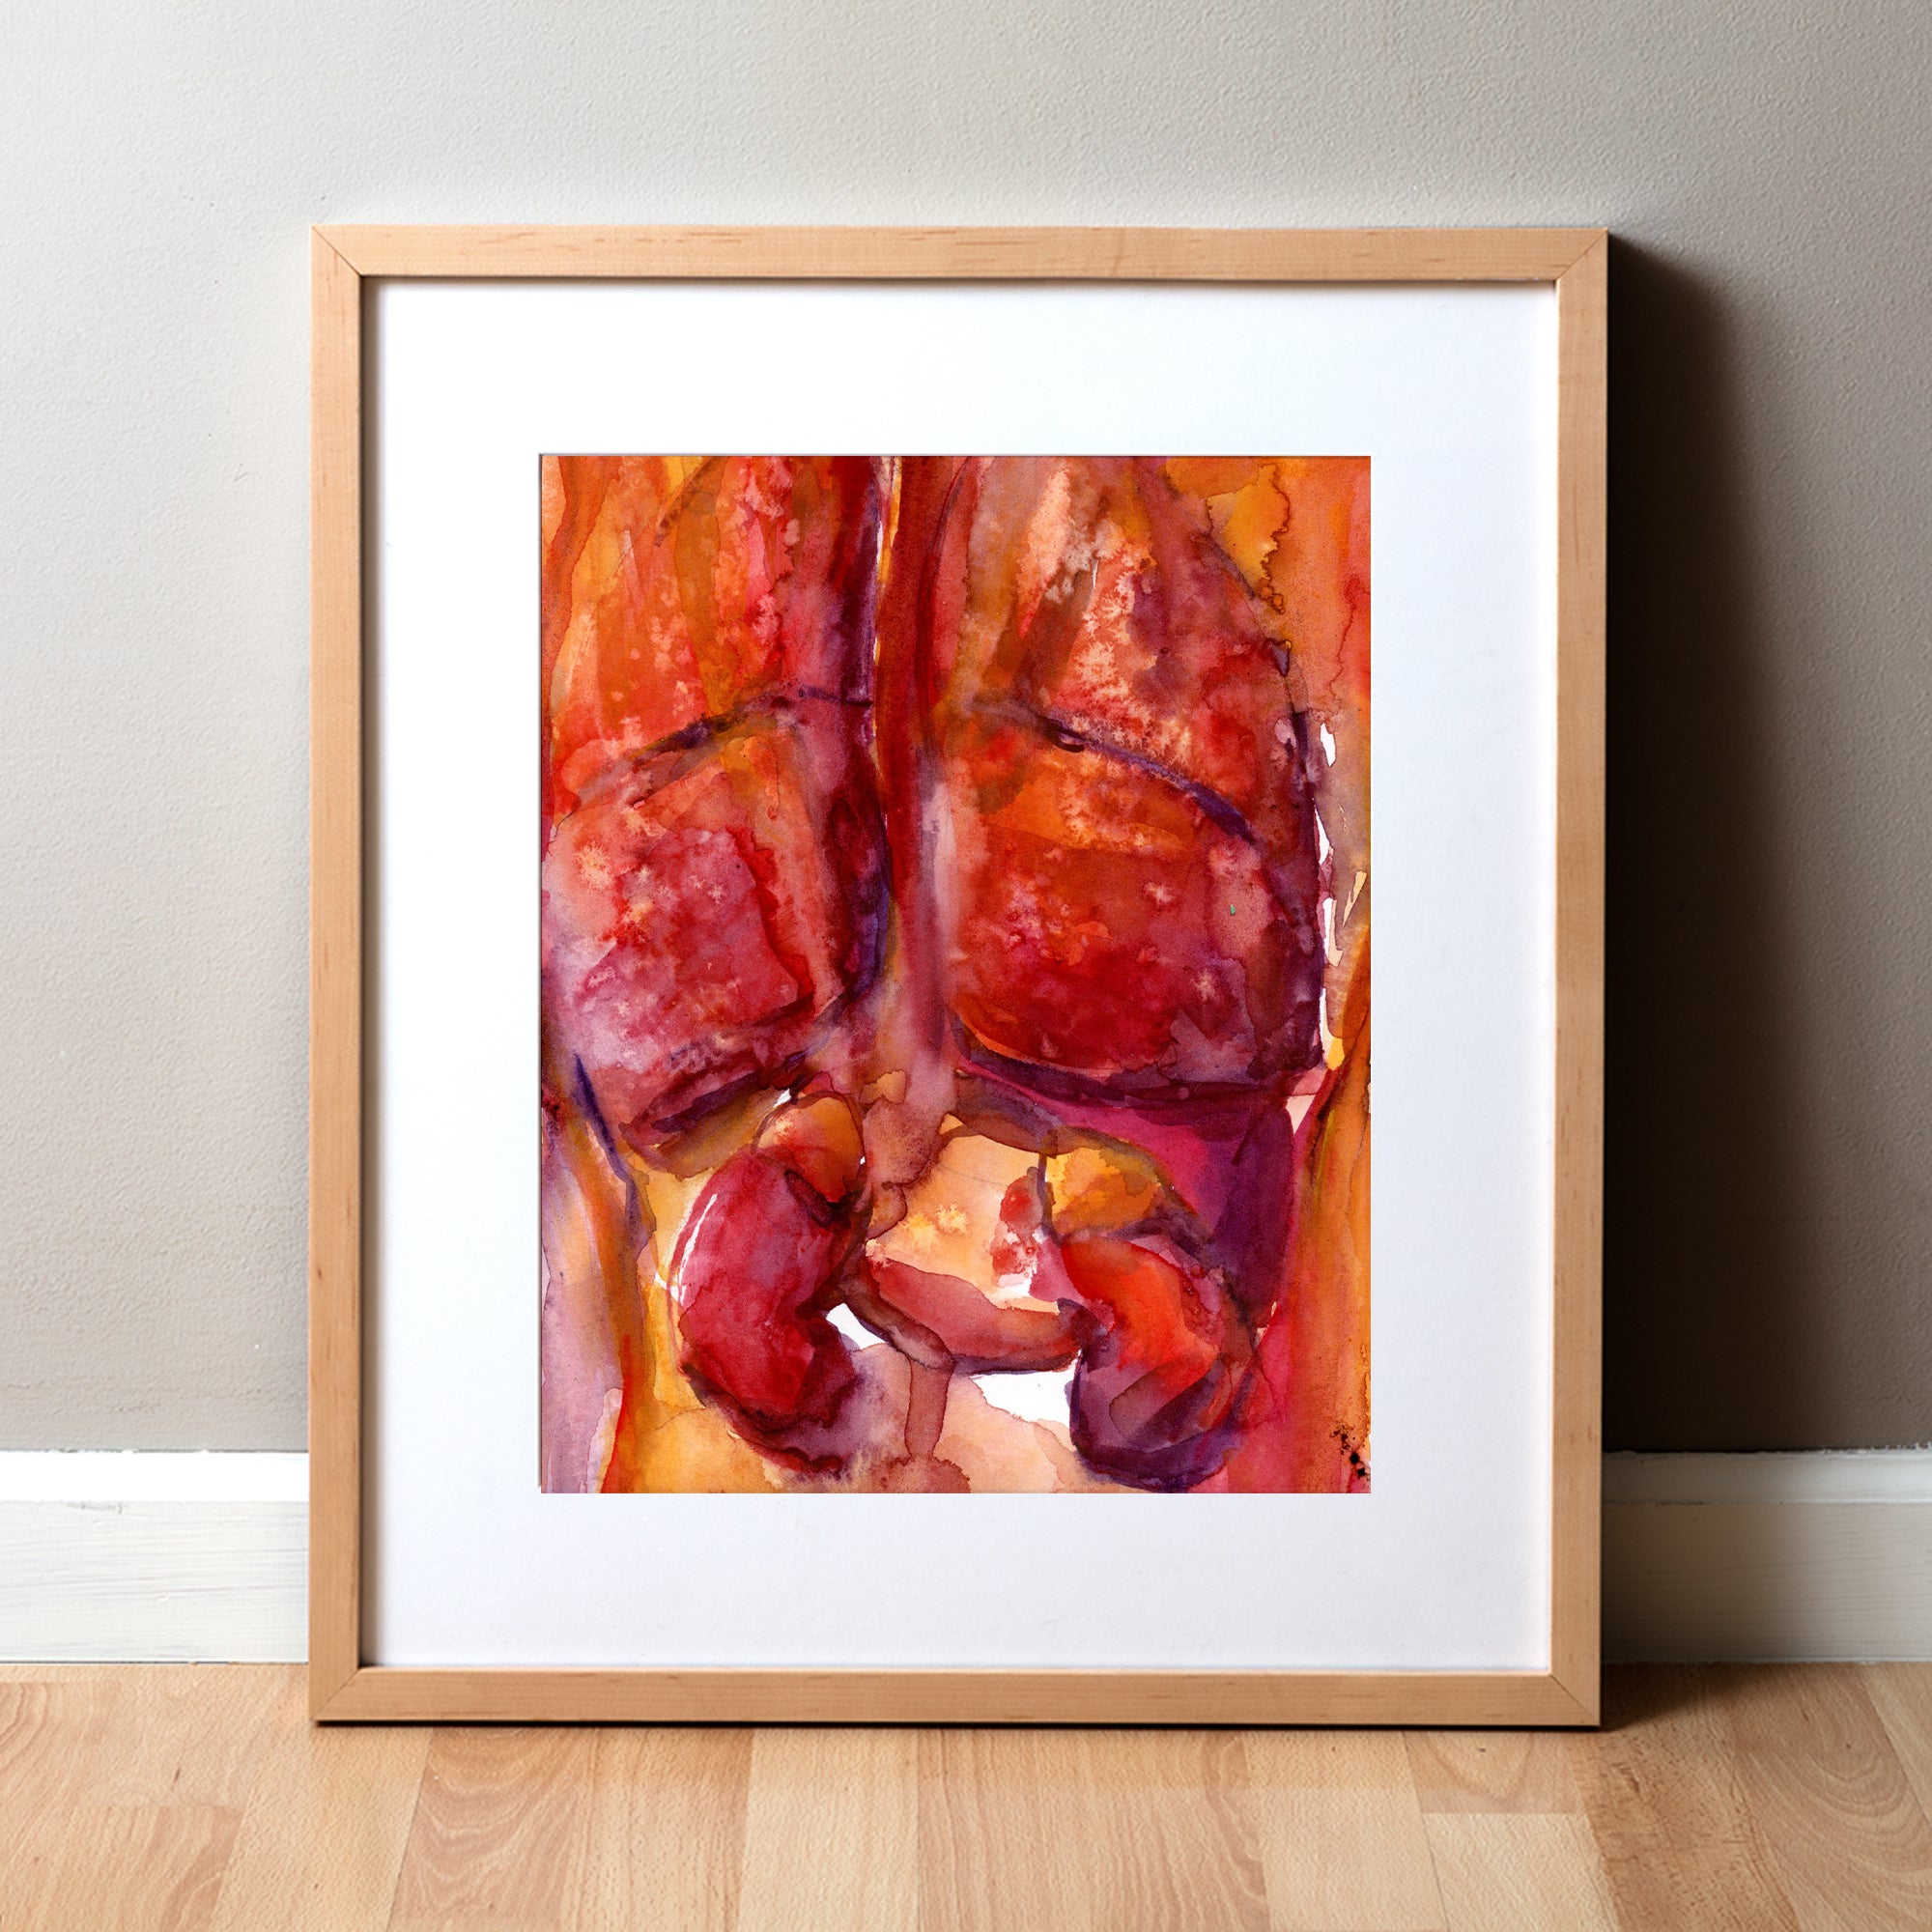 Framed watercolor painting of the internal trunk organs in reds and oranges.